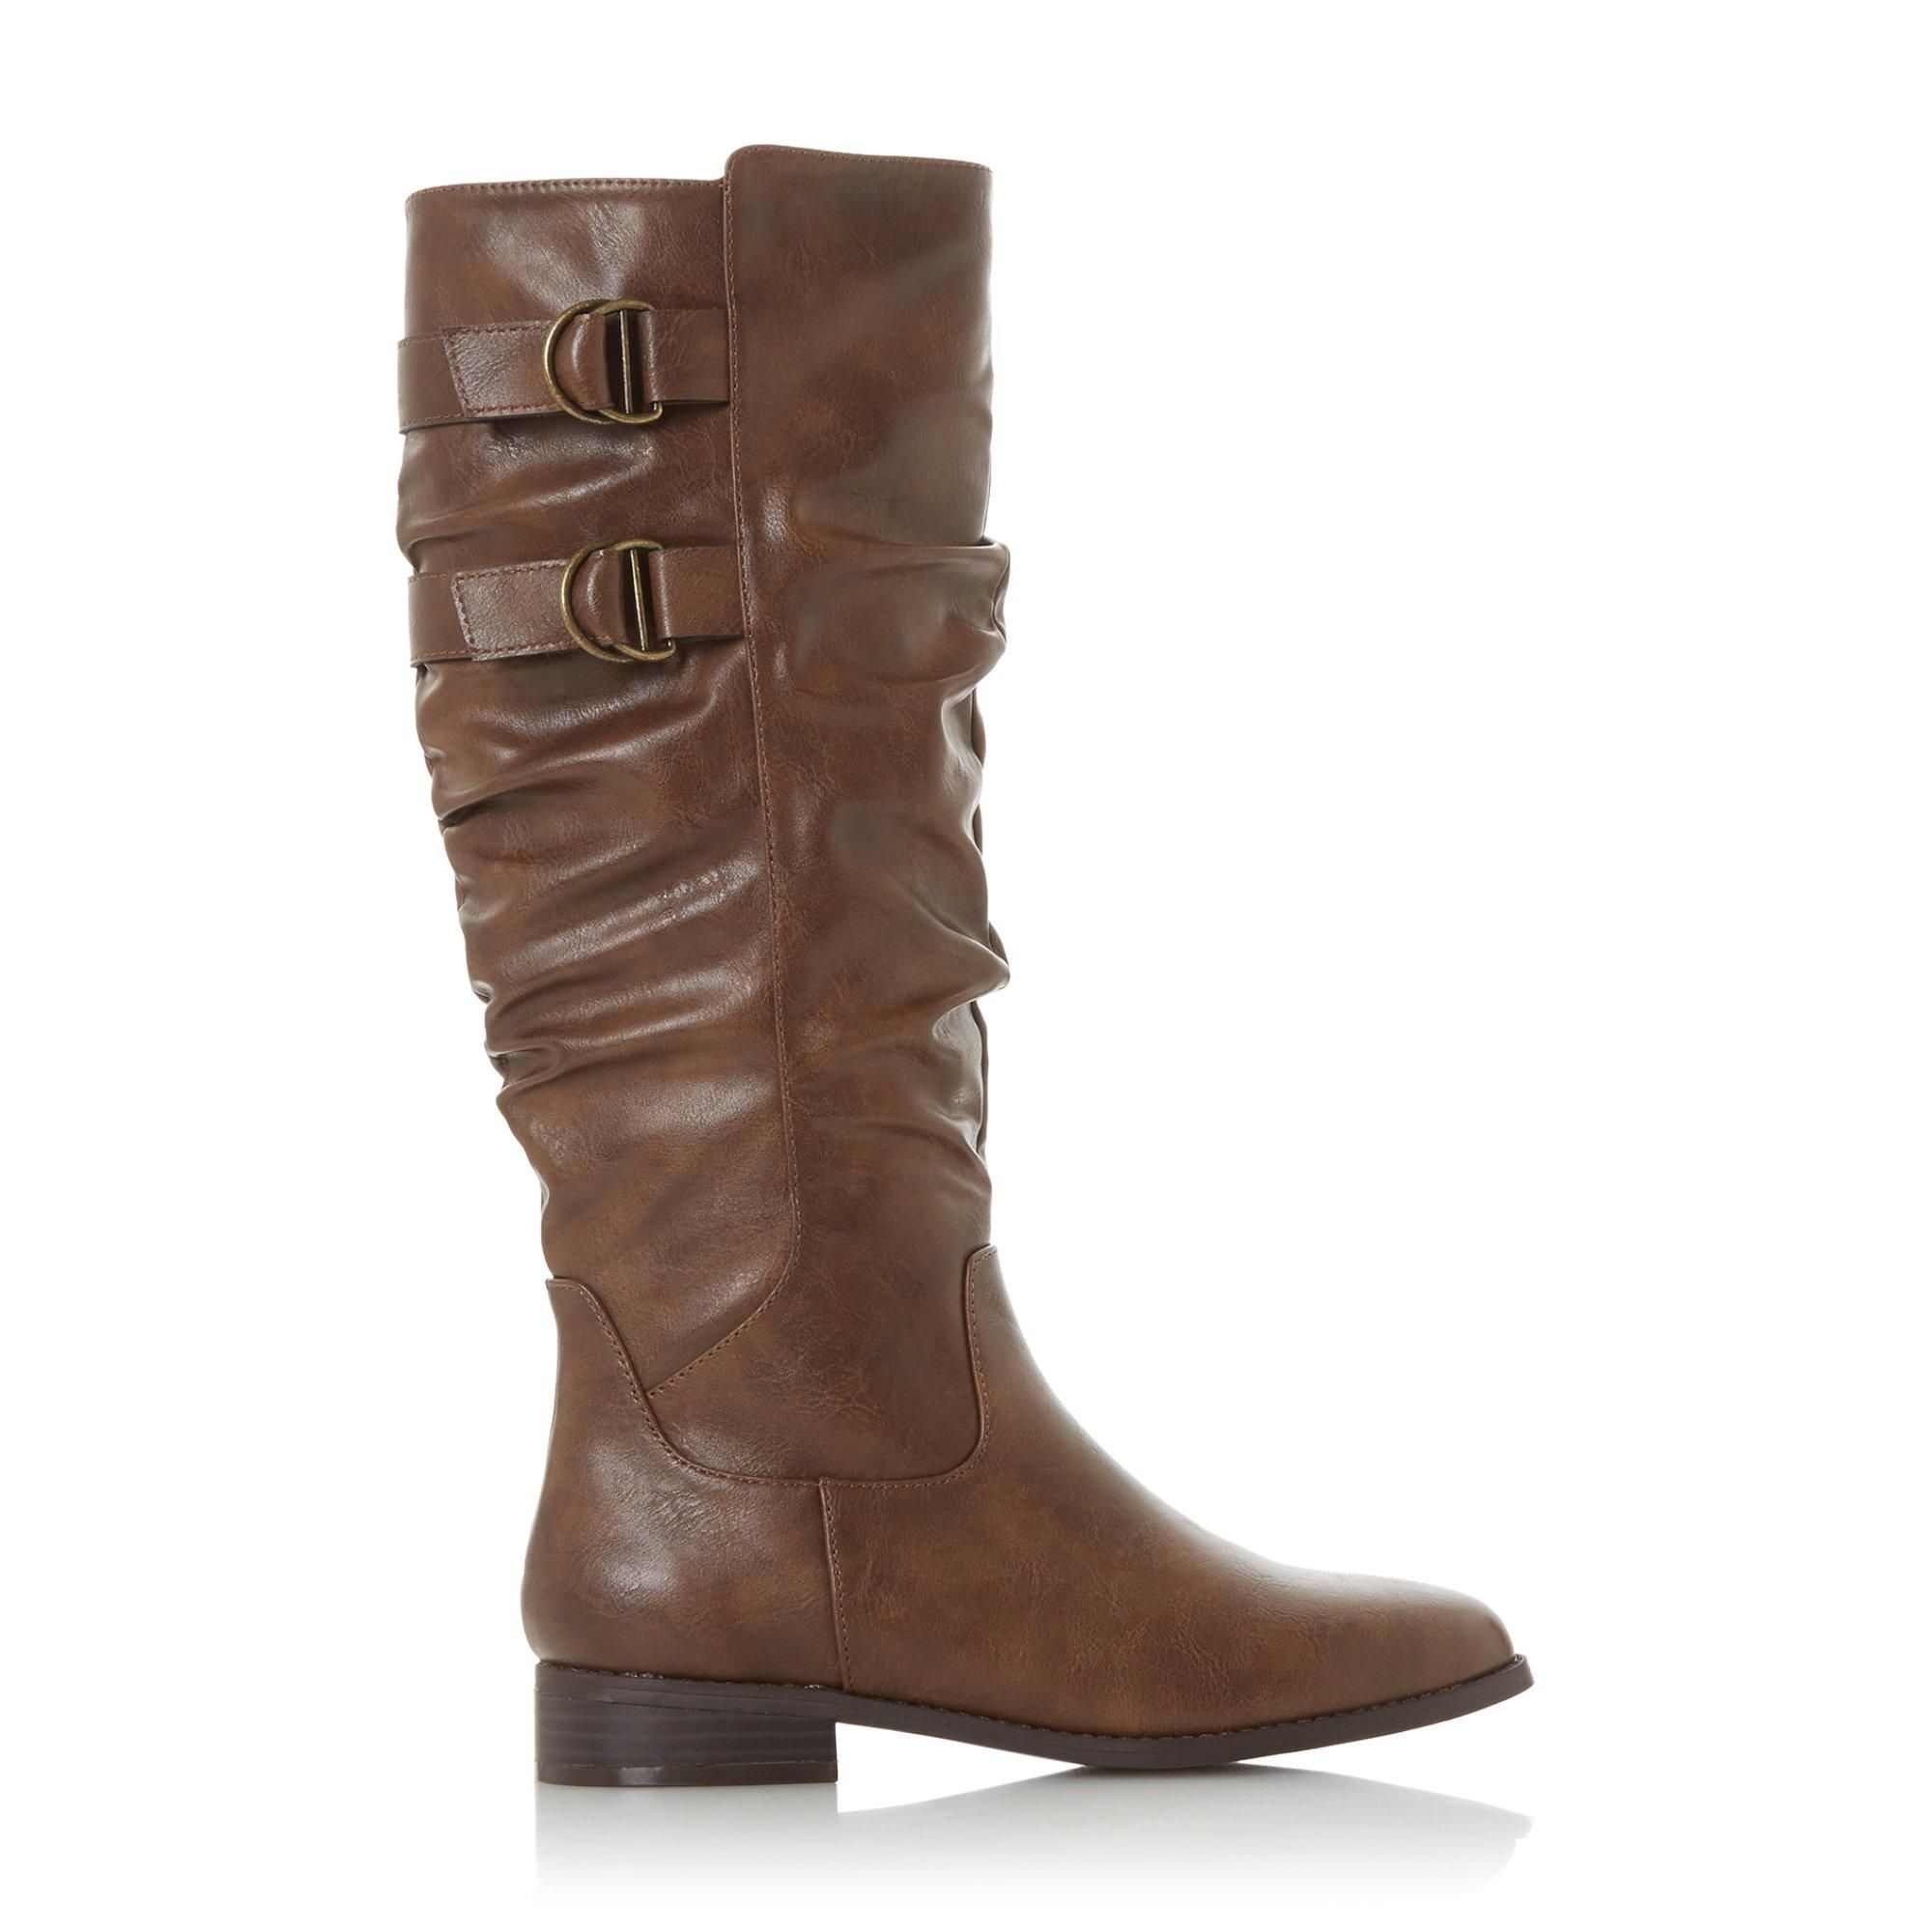 Buckle into Autumn. Knee high boots are back with Tobi. Make a statement in these traffic stopping boots.